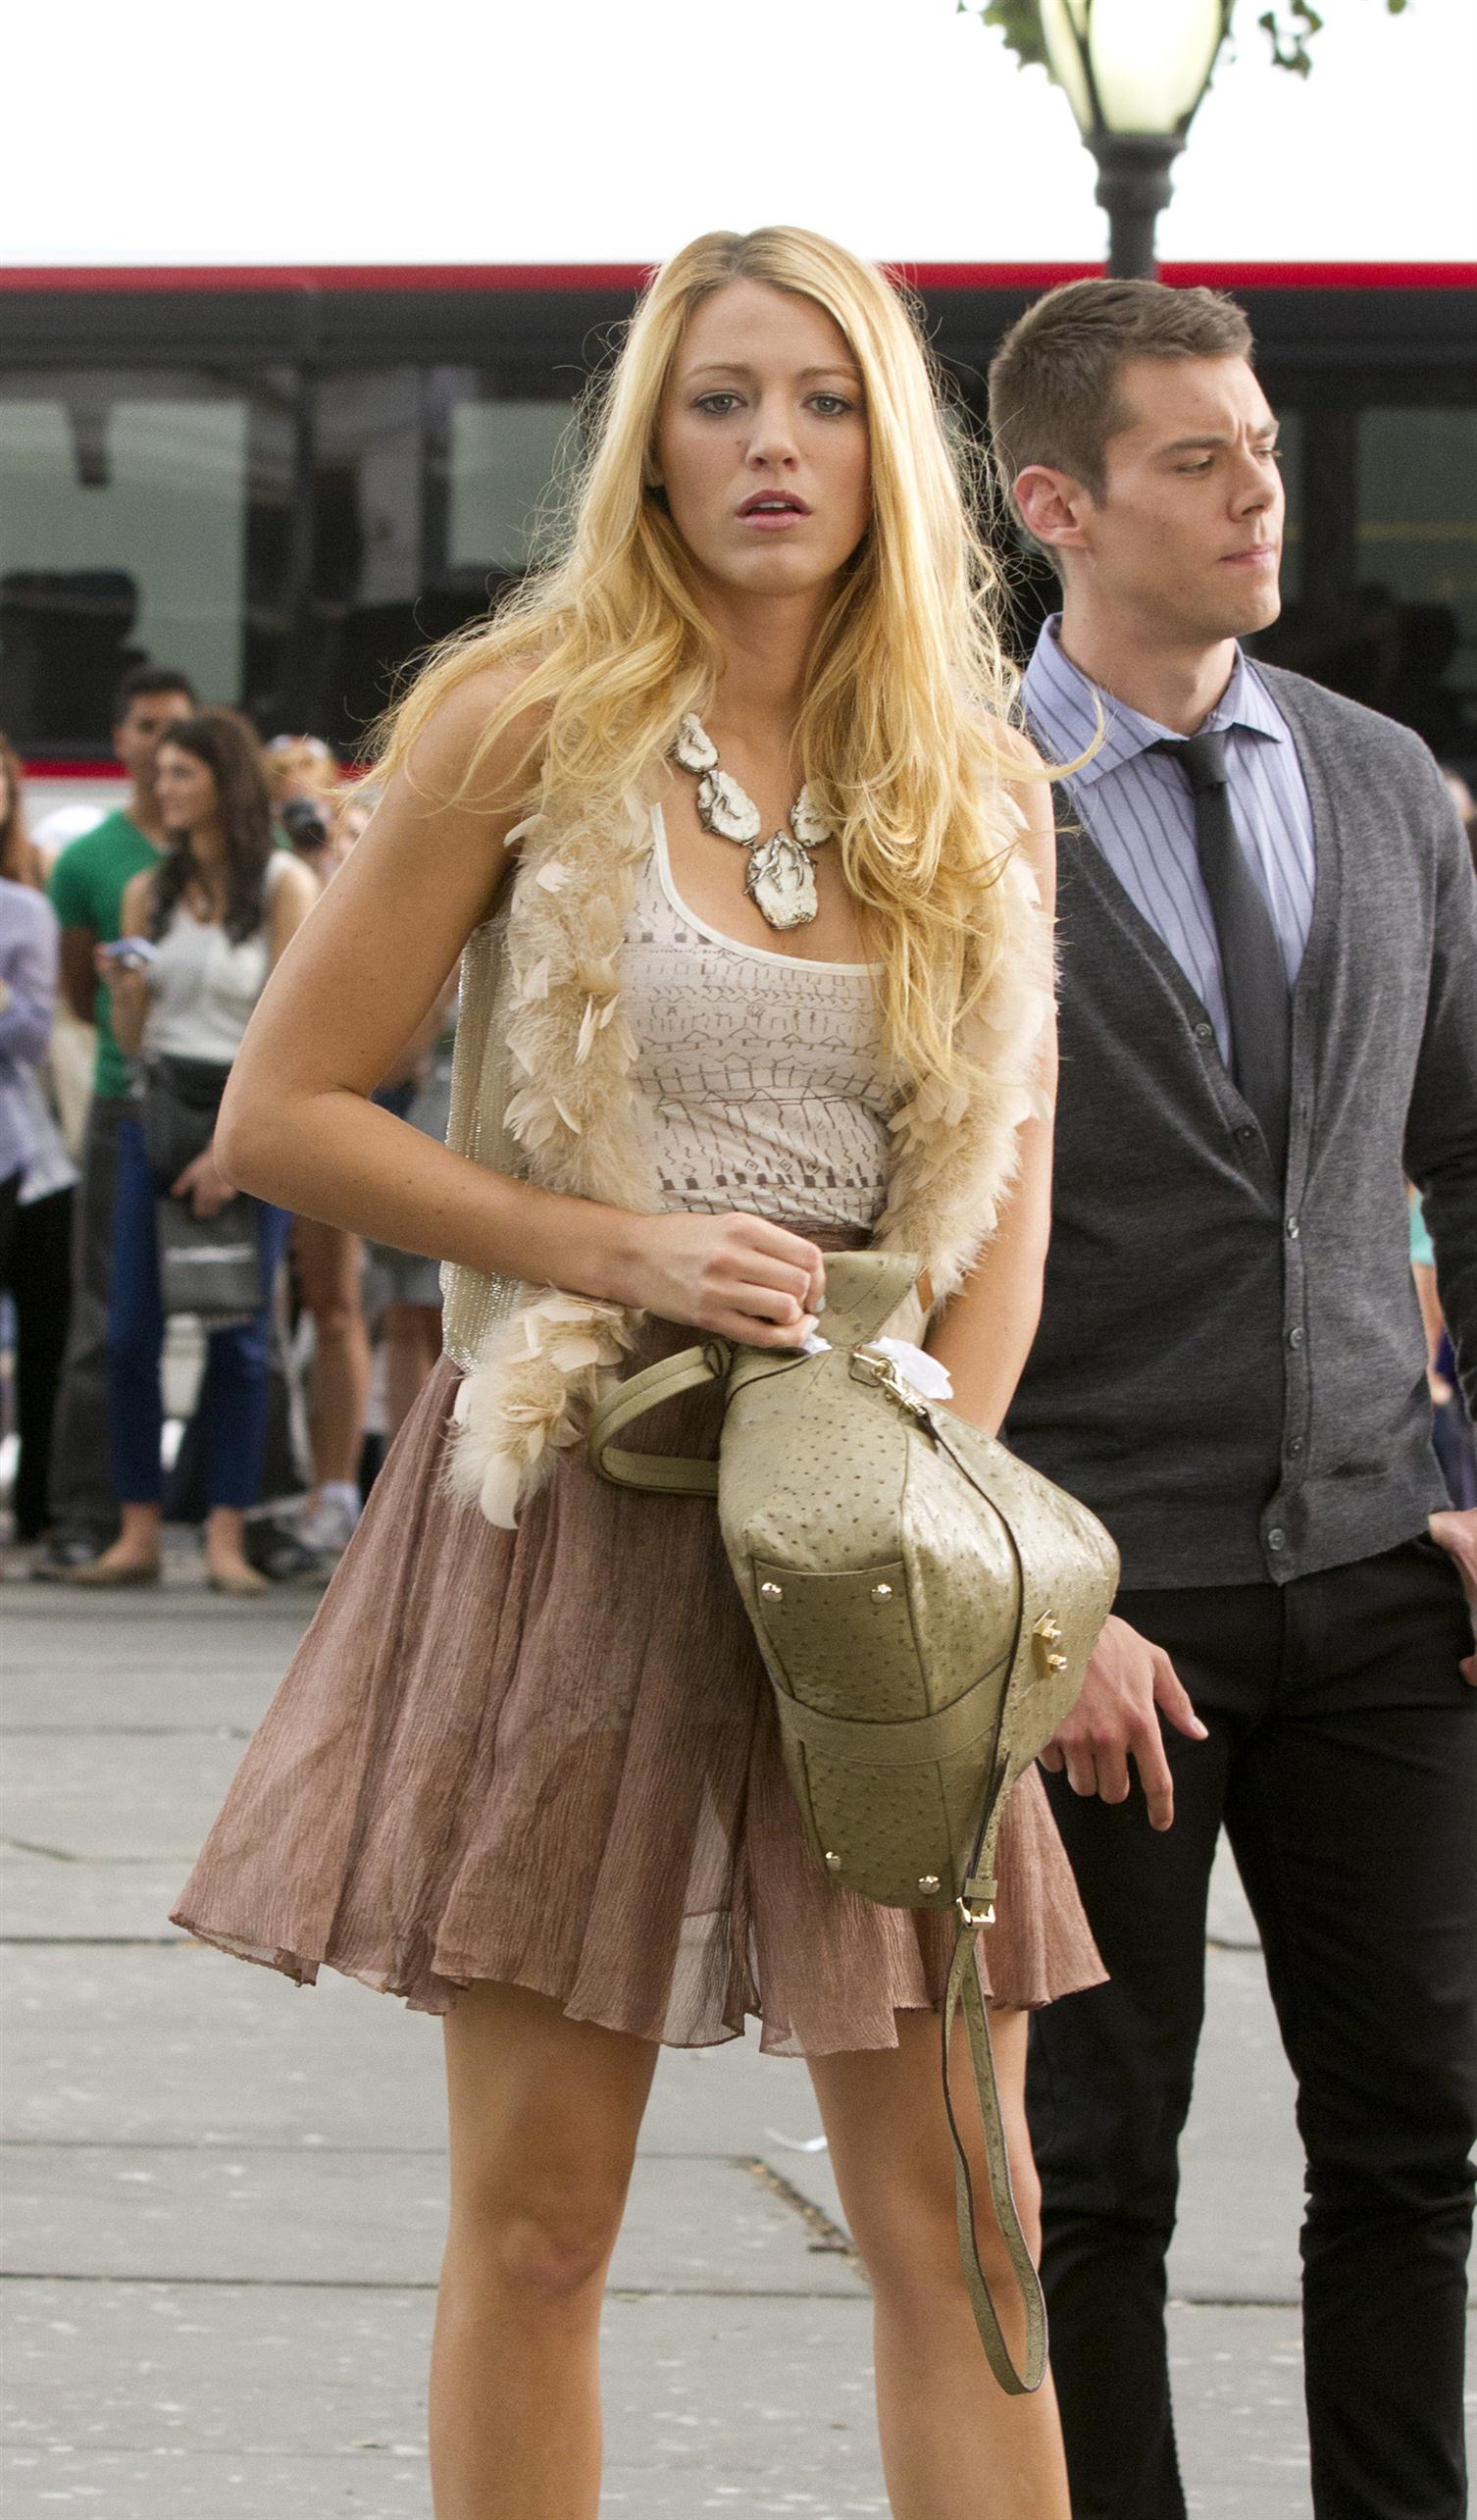 Blake Lively on the set of 'Gossip Girl' shooting on location | Picture 68598